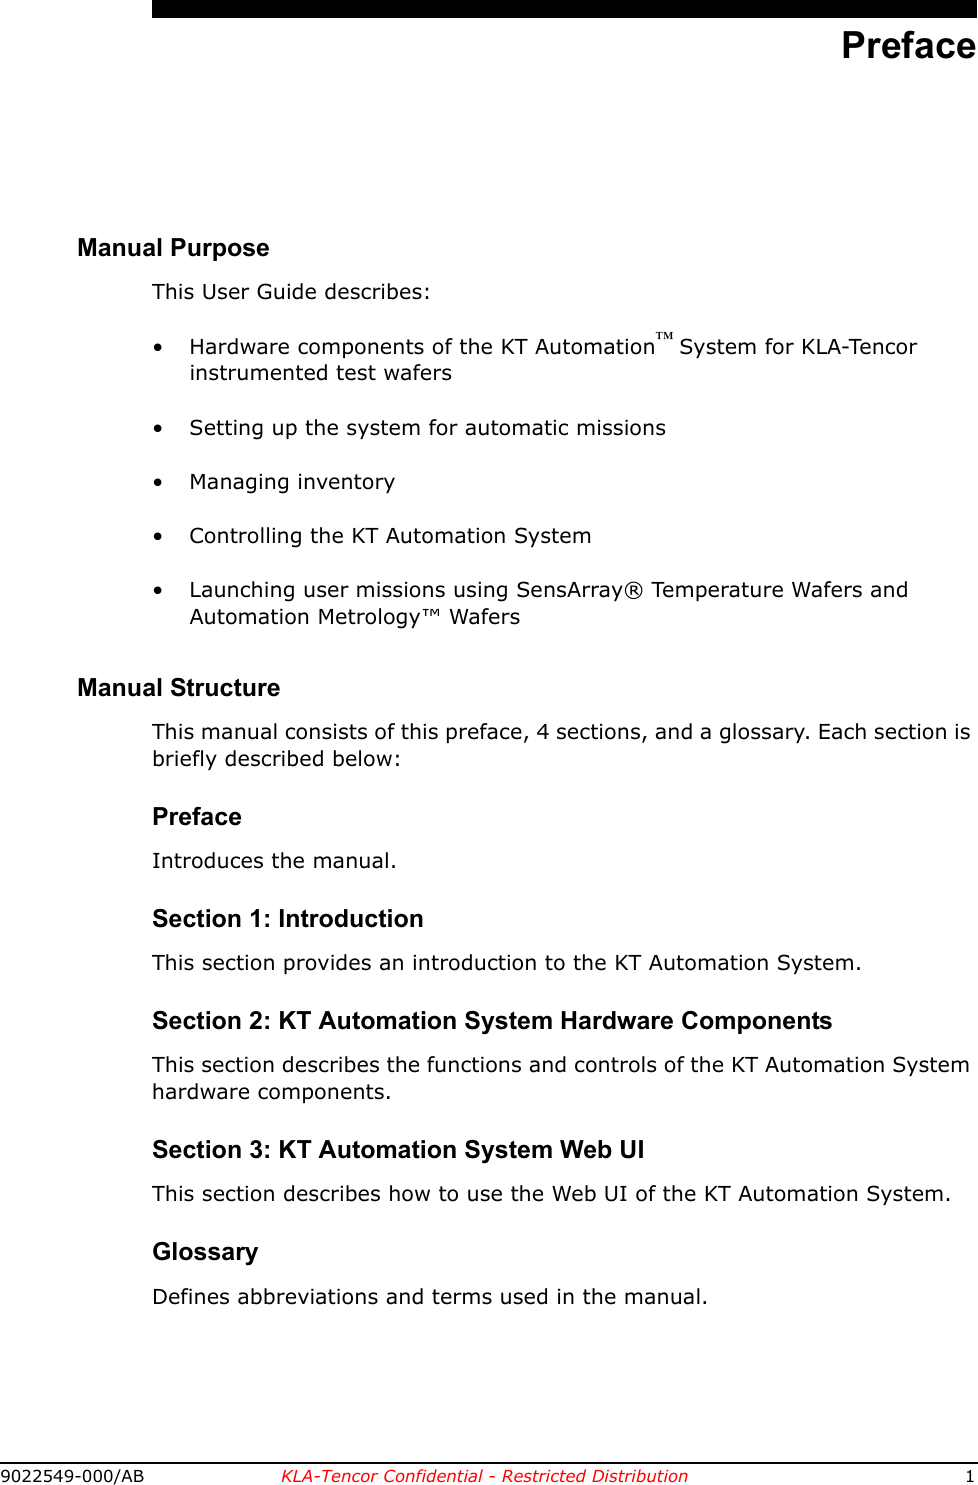 9022549-000/AB KLA-Tencor Confidential - Restricted Distribution 1PrefaceManual PurposeThis User Guide describes:• Hardware components of the KT Automation™ System for KLA-Tencor instrumented test wafers• Setting up the system for automatic missions• Managing inventory• Controlling the KT Automation System • Launching user missions using SensArray® Temperature Wafers and Automation Metrology™ WafersManual StructureThis manual consists of this preface, 4 sections, and a glossary. Each section is briefly described below:PrefaceIntroduces the manual. Section 1: IntroductionThis section provides an introduction to the KT Automation System.Section 2: KT Automation System Hardware ComponentsThis section describes the functions and controls of the KT Automation System hardware components.Section 3: KT Automation System Web UIThis section describes how to use the Web UI of the KT Automation System.GlossaryDefines abbreviations and terms used in the manual.